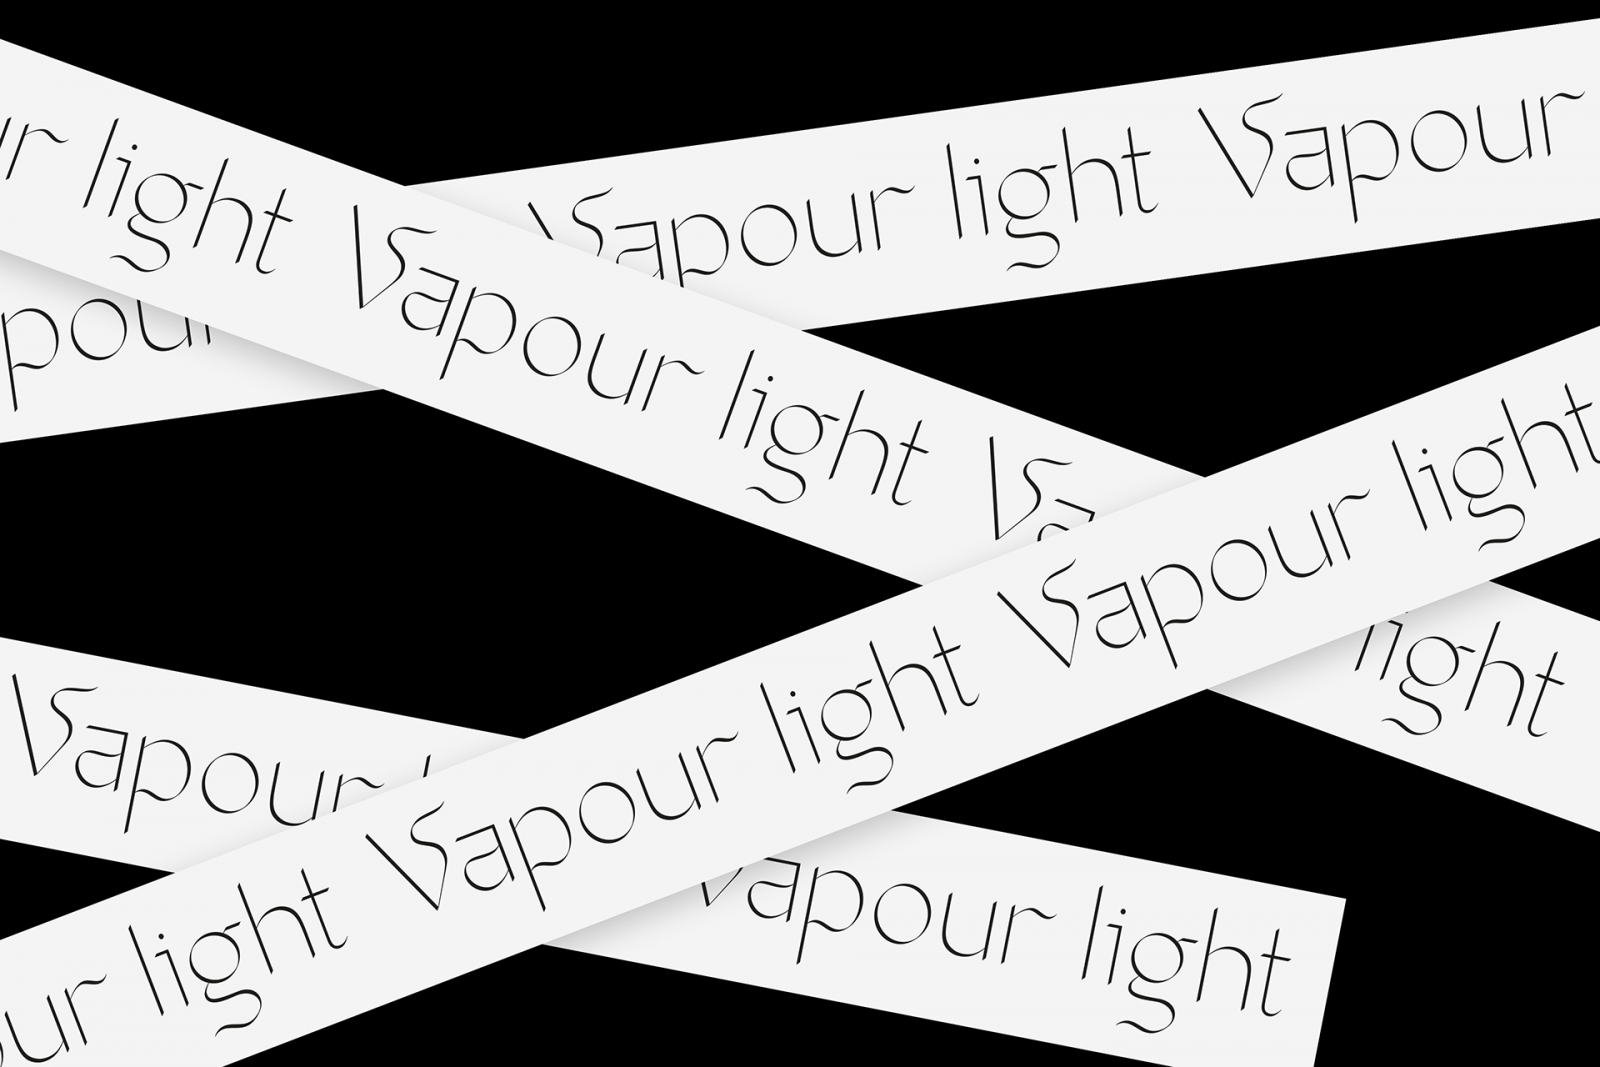 Graceful Vapour Typeface Inspired by Calligraphy by Anna Takács